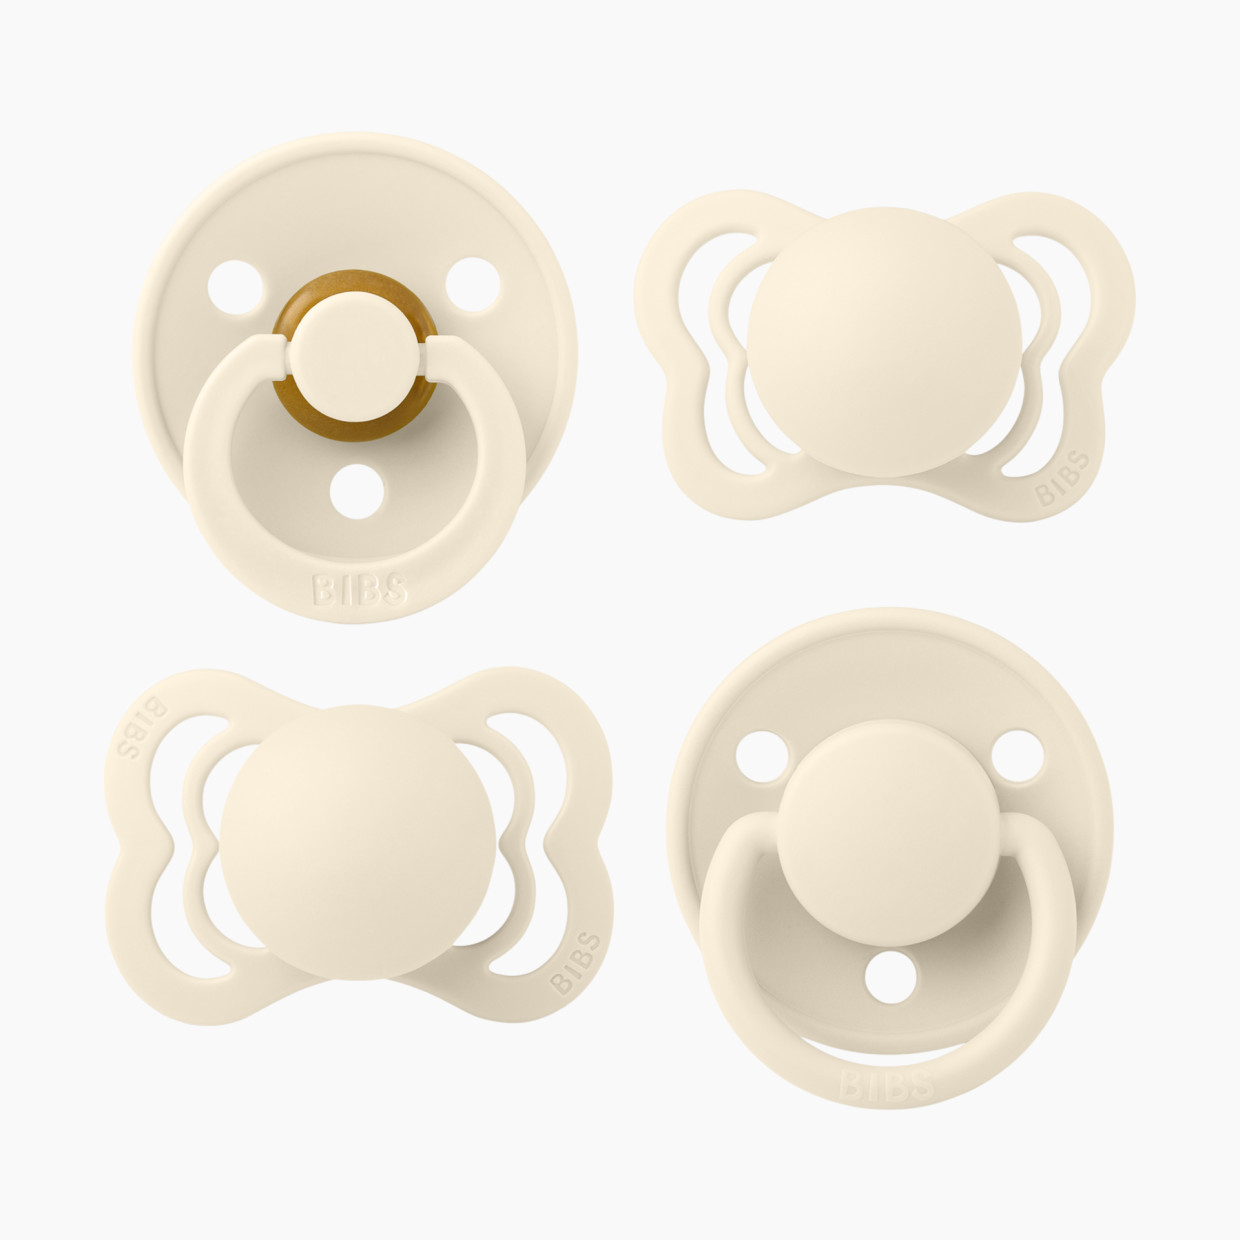 BIBS Try-it Pacifier Collection - Ivory, 0-6 Months.